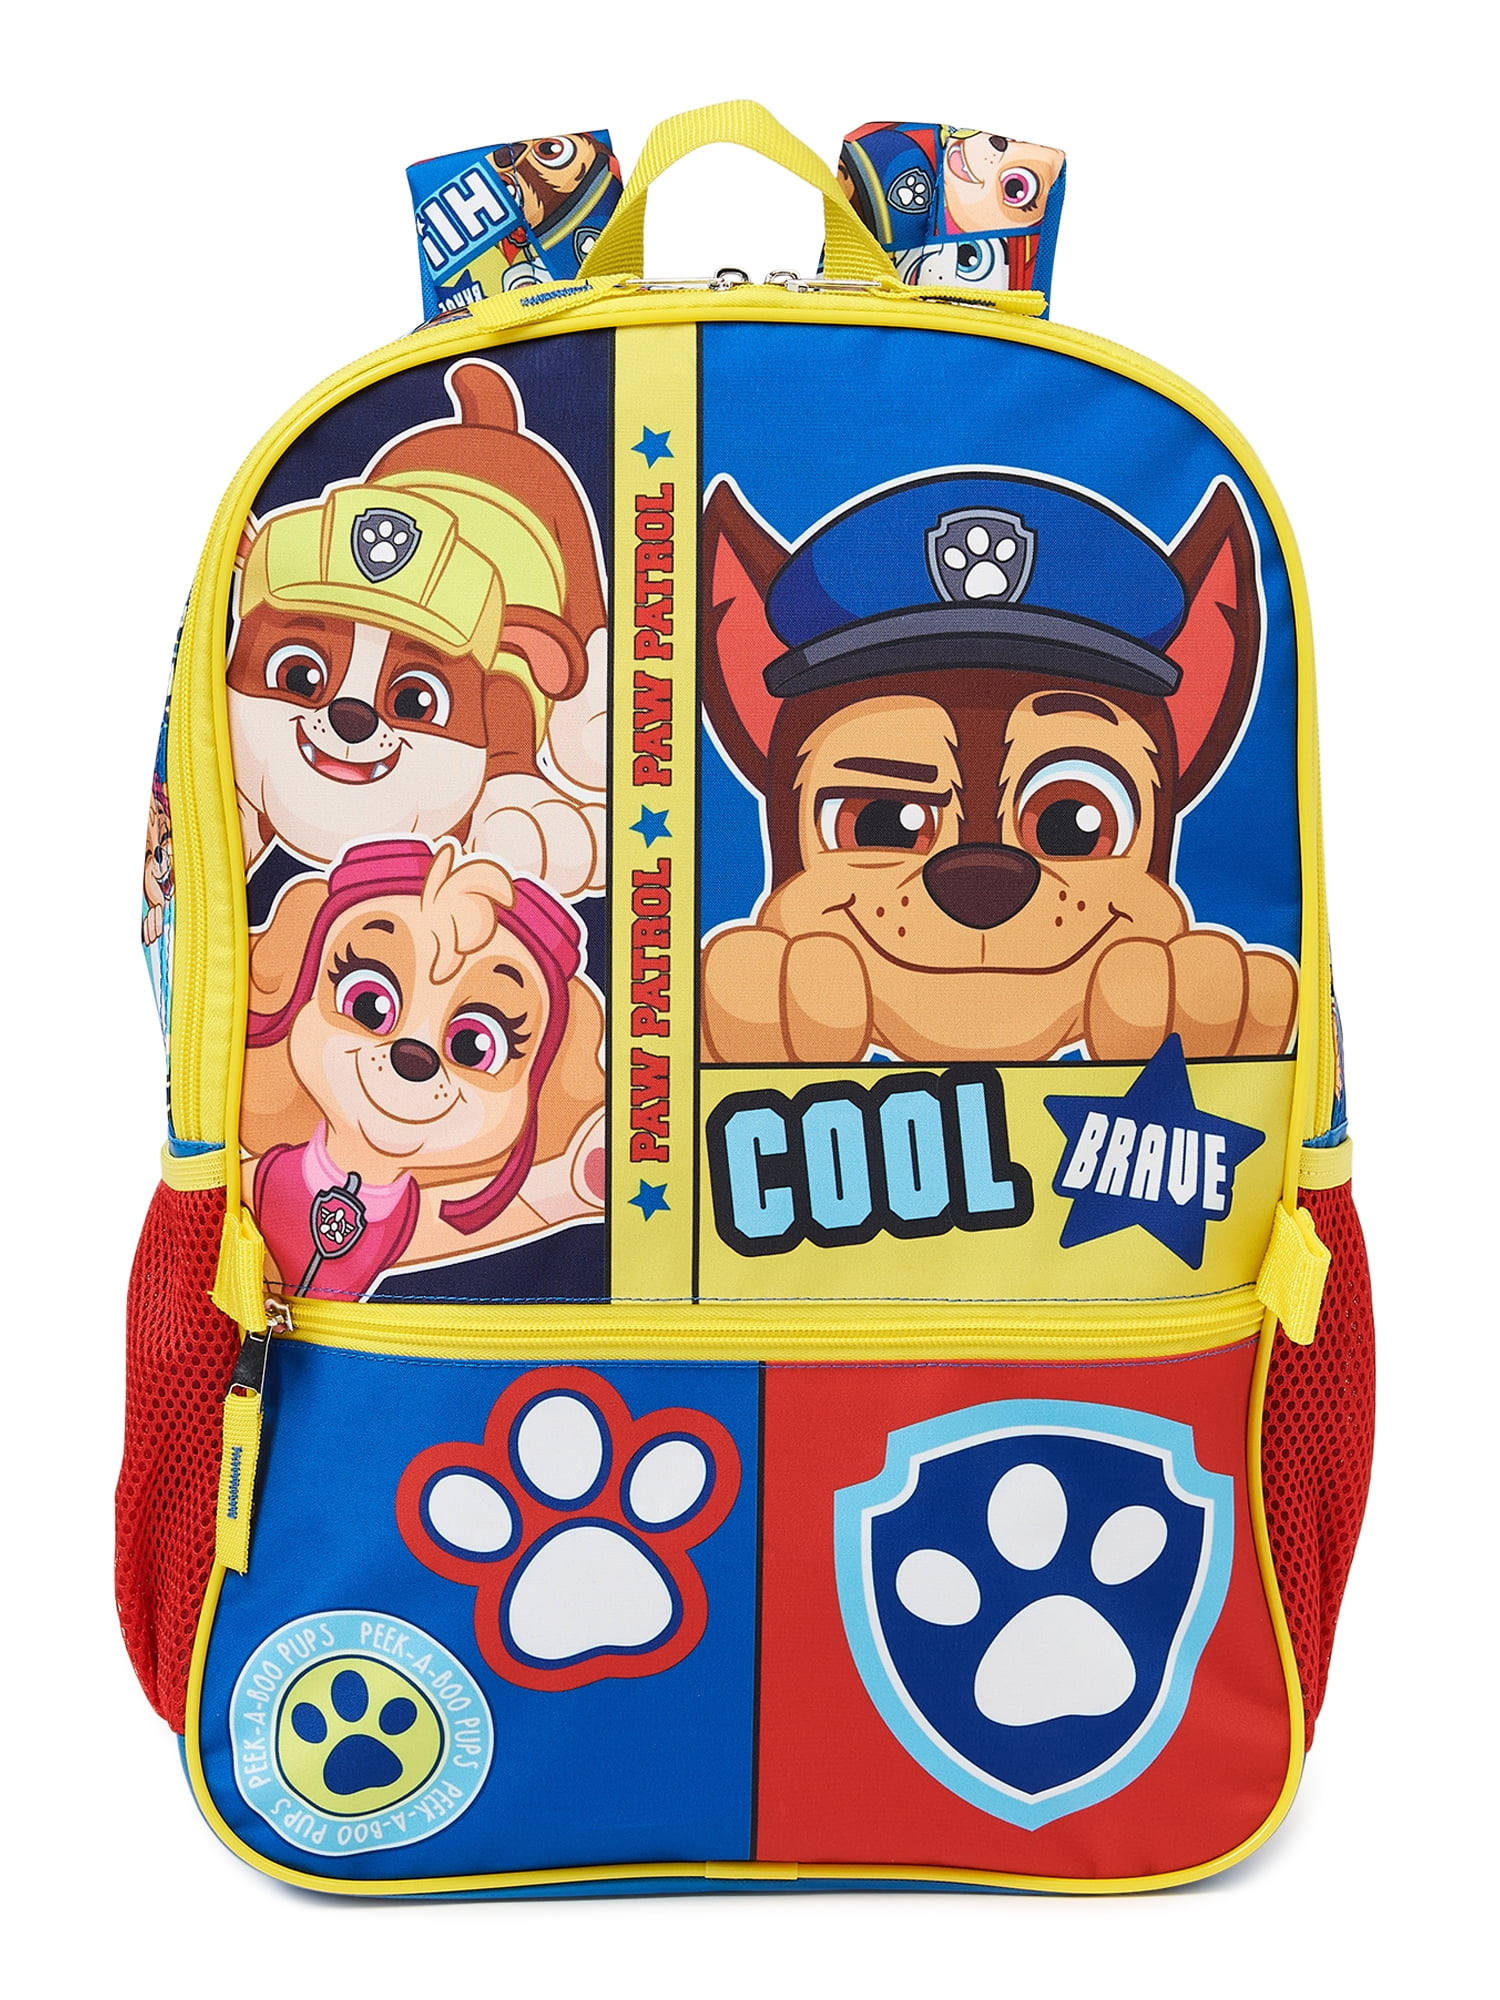 OFFICIAL LICENSED 17" PAW PATROL CHILDRENS BACKPACK CHILDS PAW PATROL SCHOOL BAG 